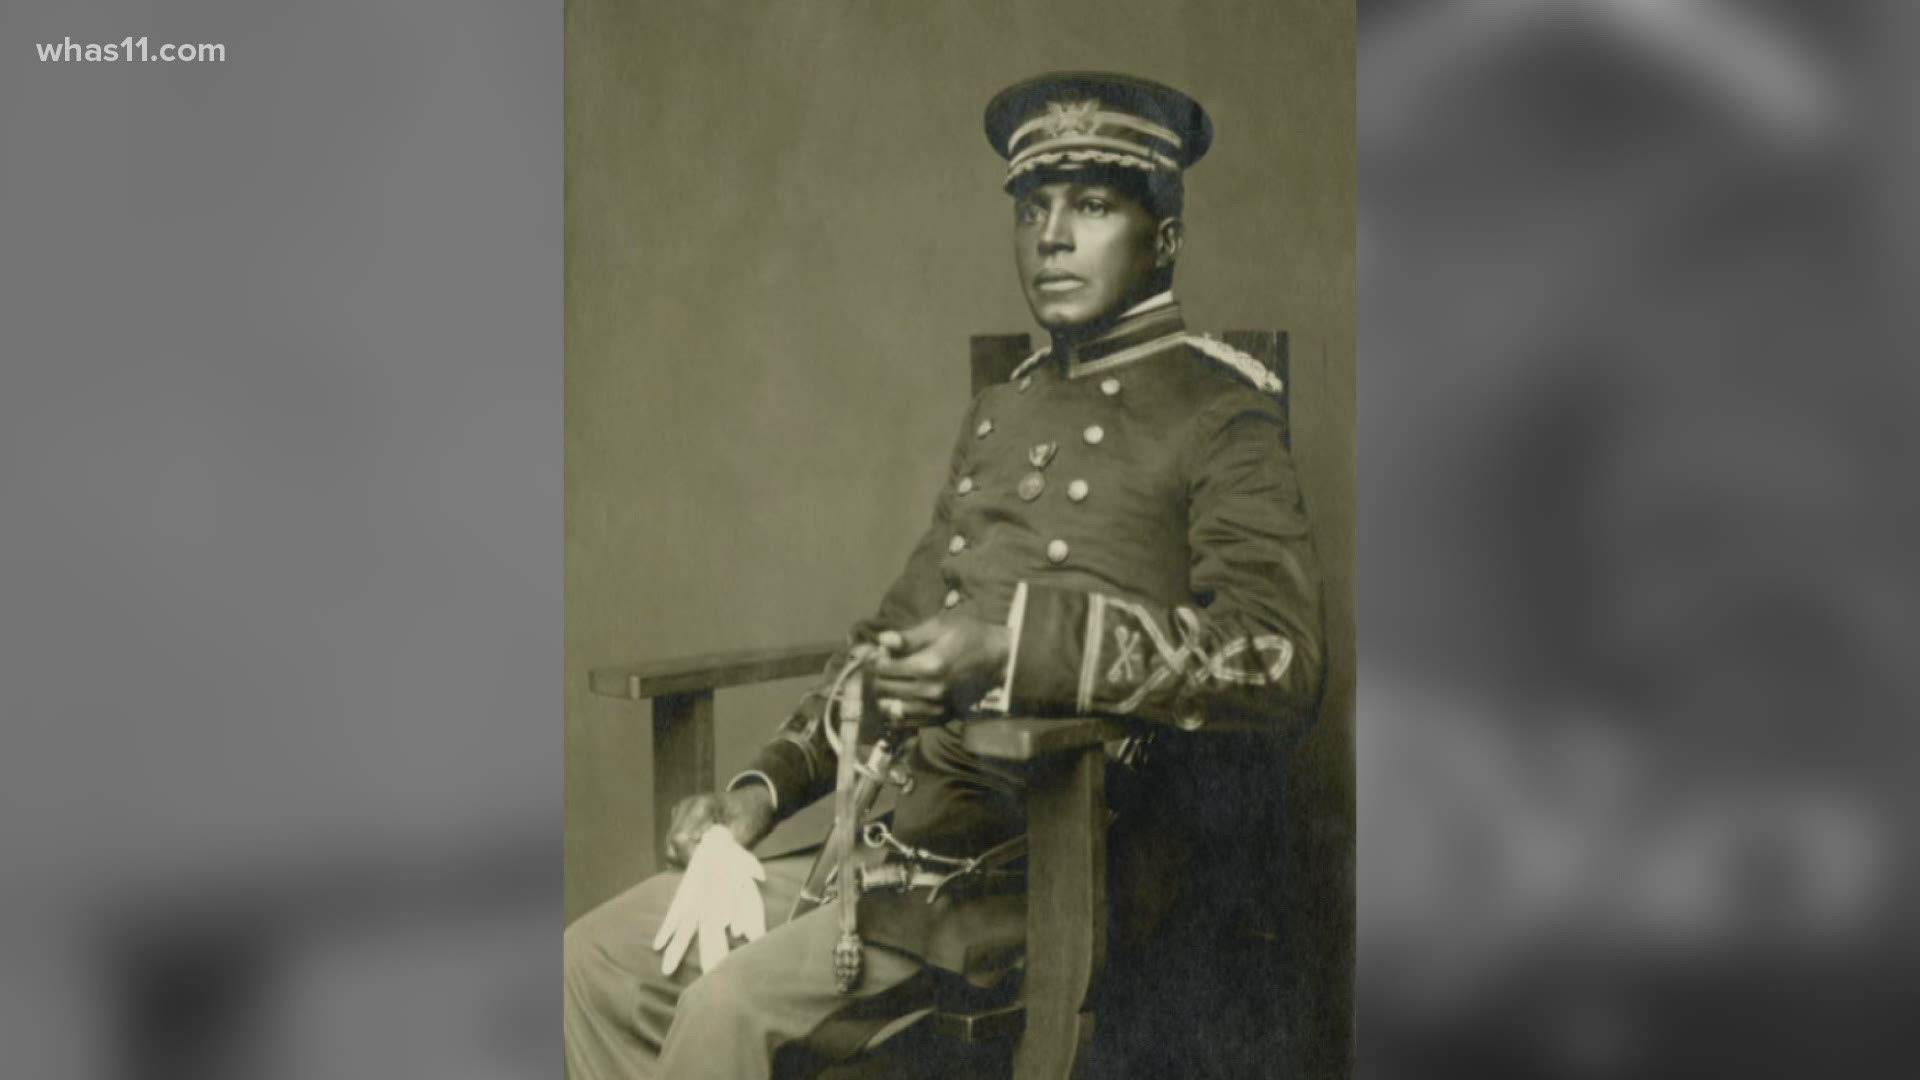 Colonel Young was a Buffalo Soldier in the 1800s from Mays Lick, Kentucky who made a career of breaking down barriers in the segregated U.S. Army.